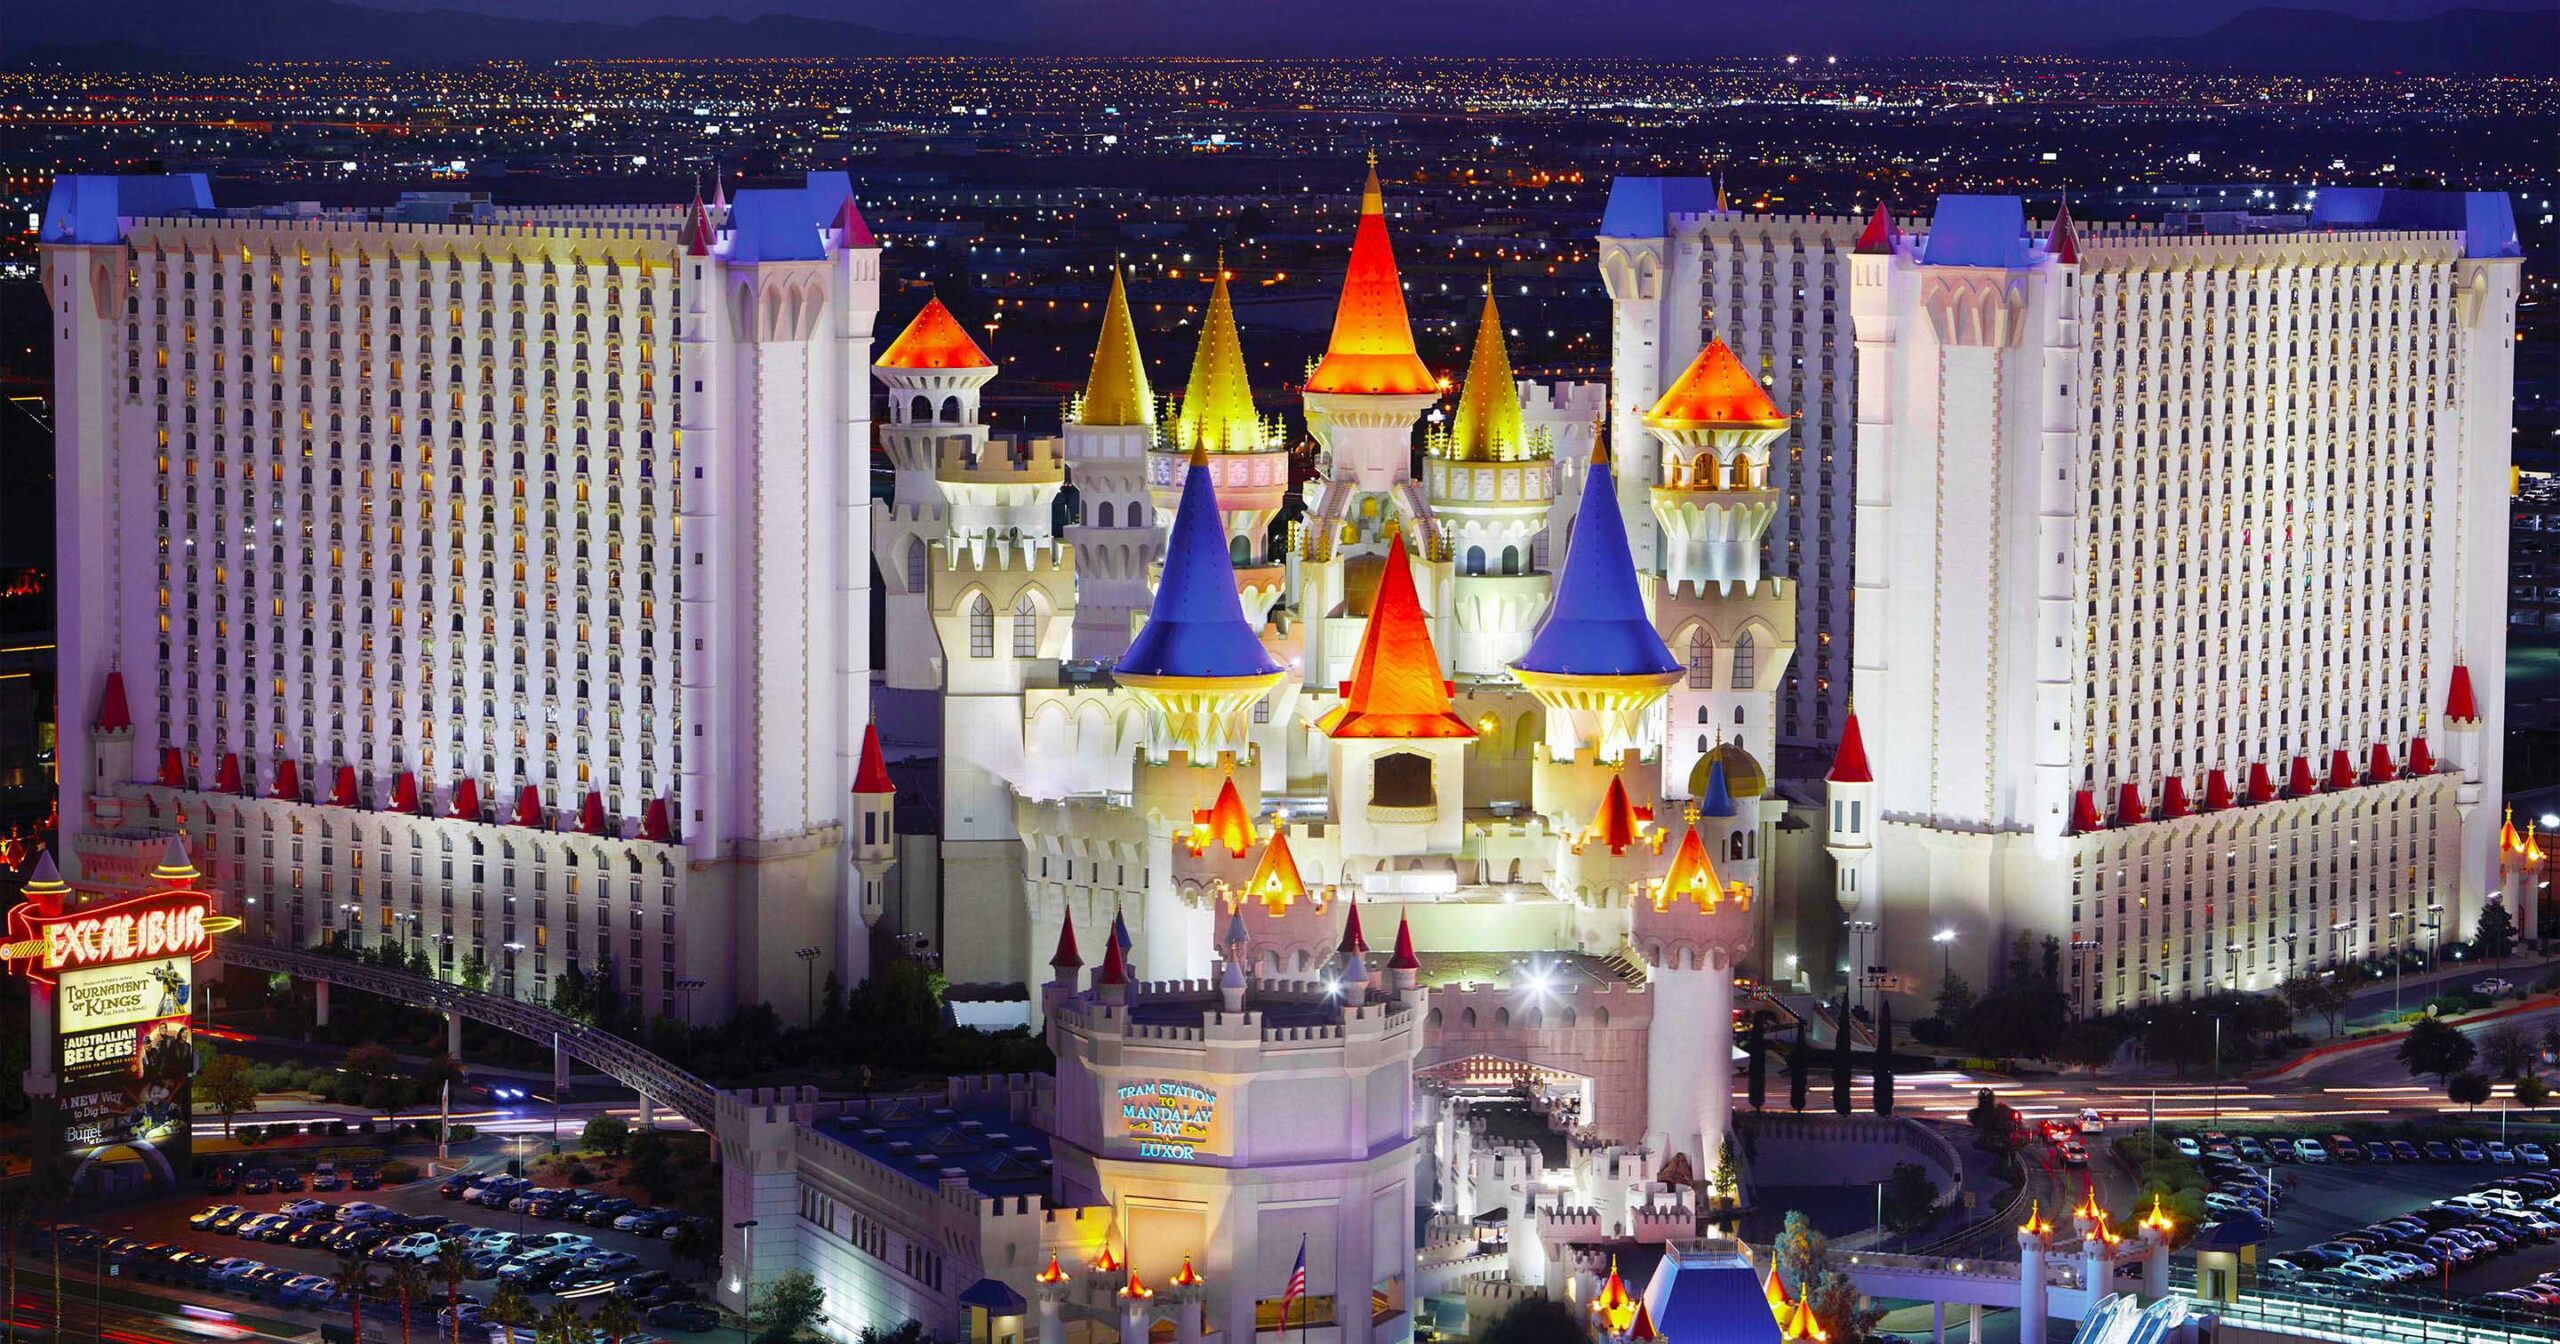 Excalibur Las Vegas - among best budget hotels on the Strip